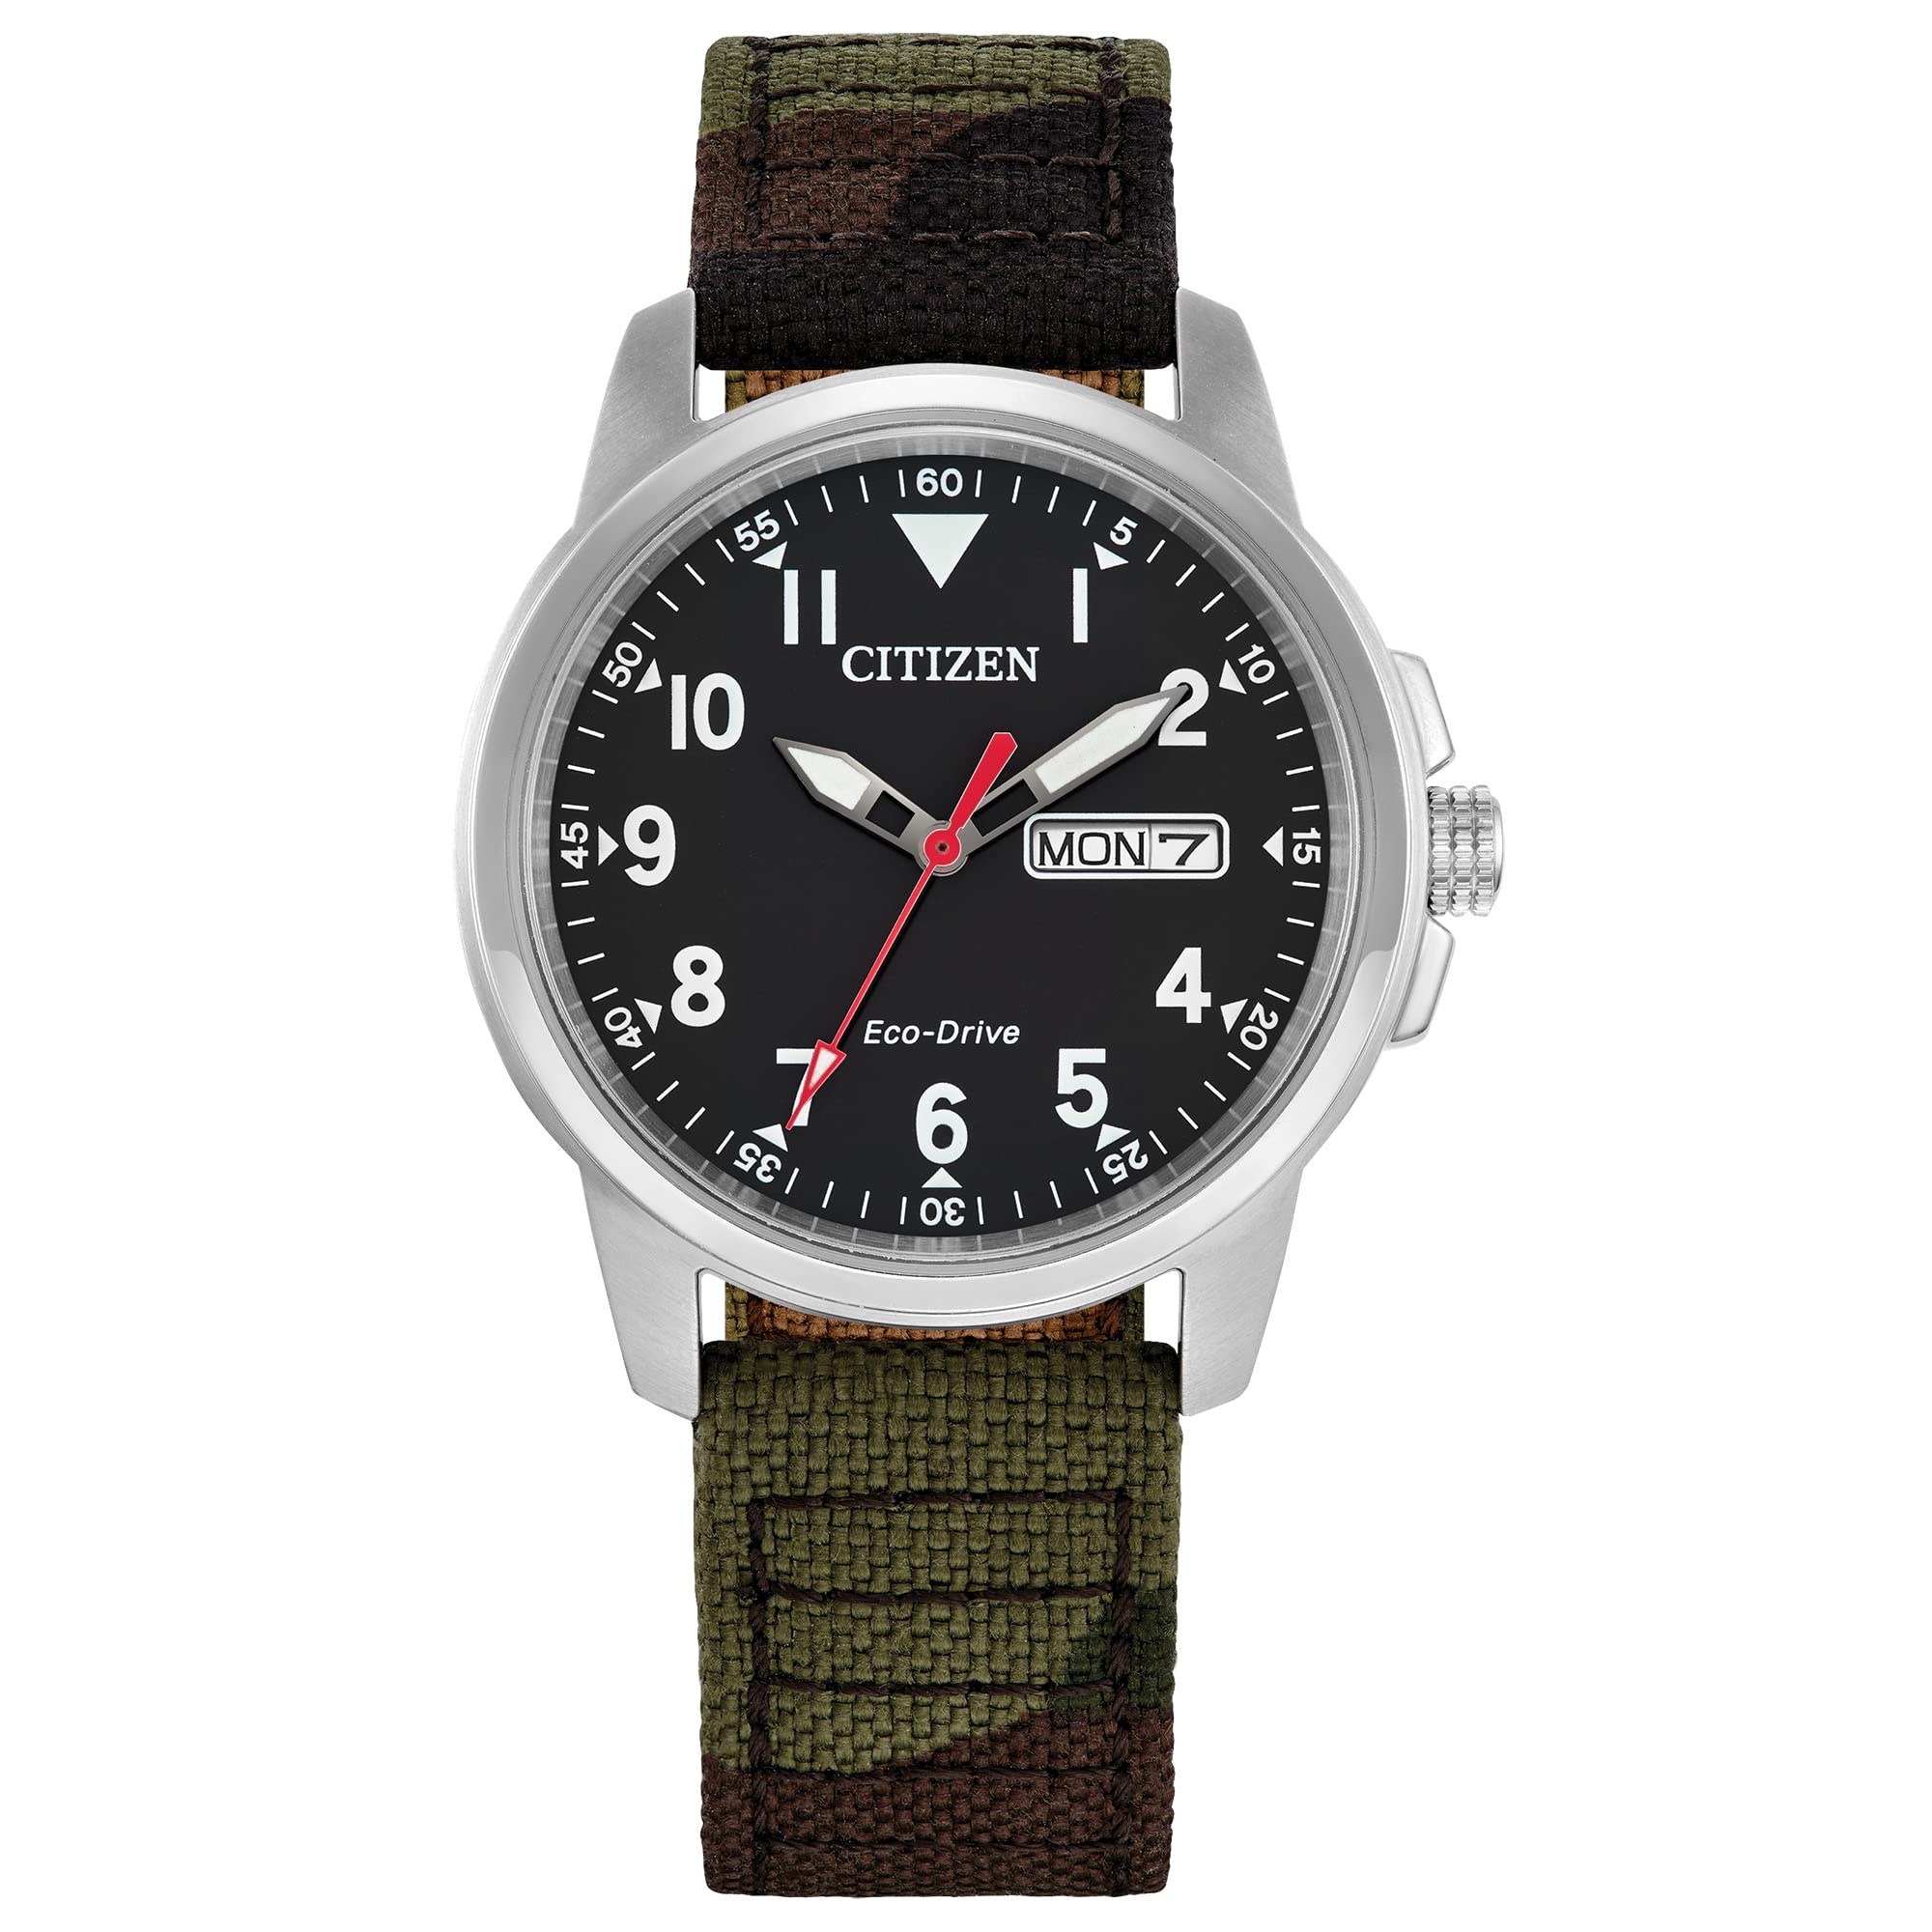 Citizen Mens Eco-Drive Weekender Garrison Field Watch in Stainless Steel with Camo Nylon strap Black Dial Model BM8188-01